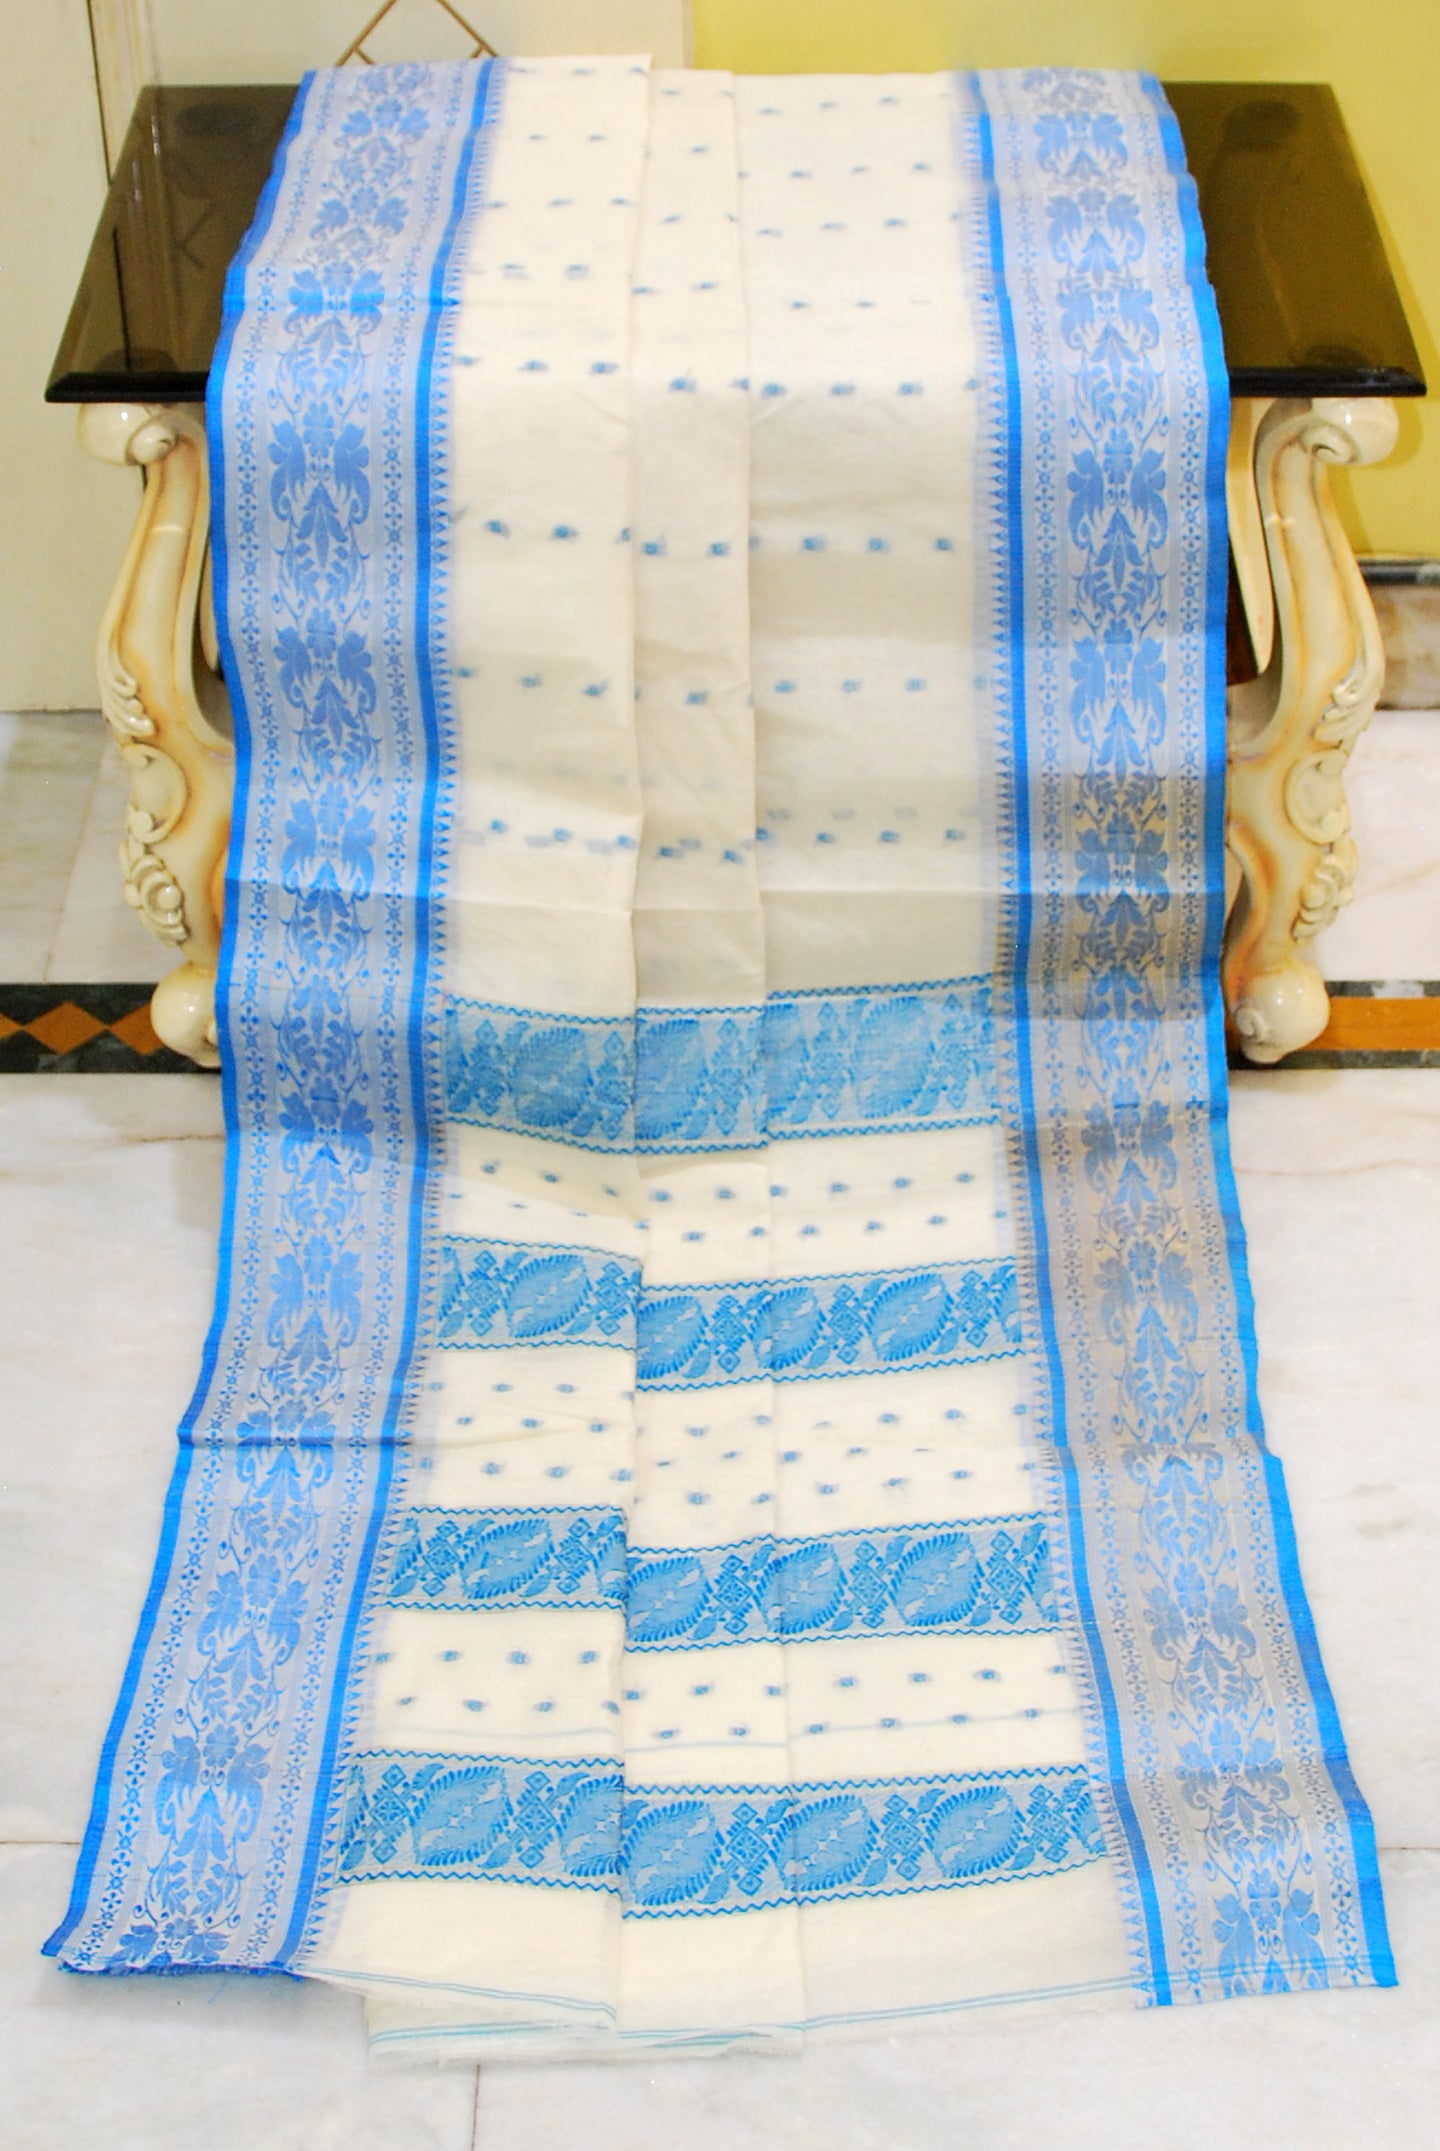 Nakshi Woven Thread Work Tangail Handloom Cotton Saree in Off White and Blue